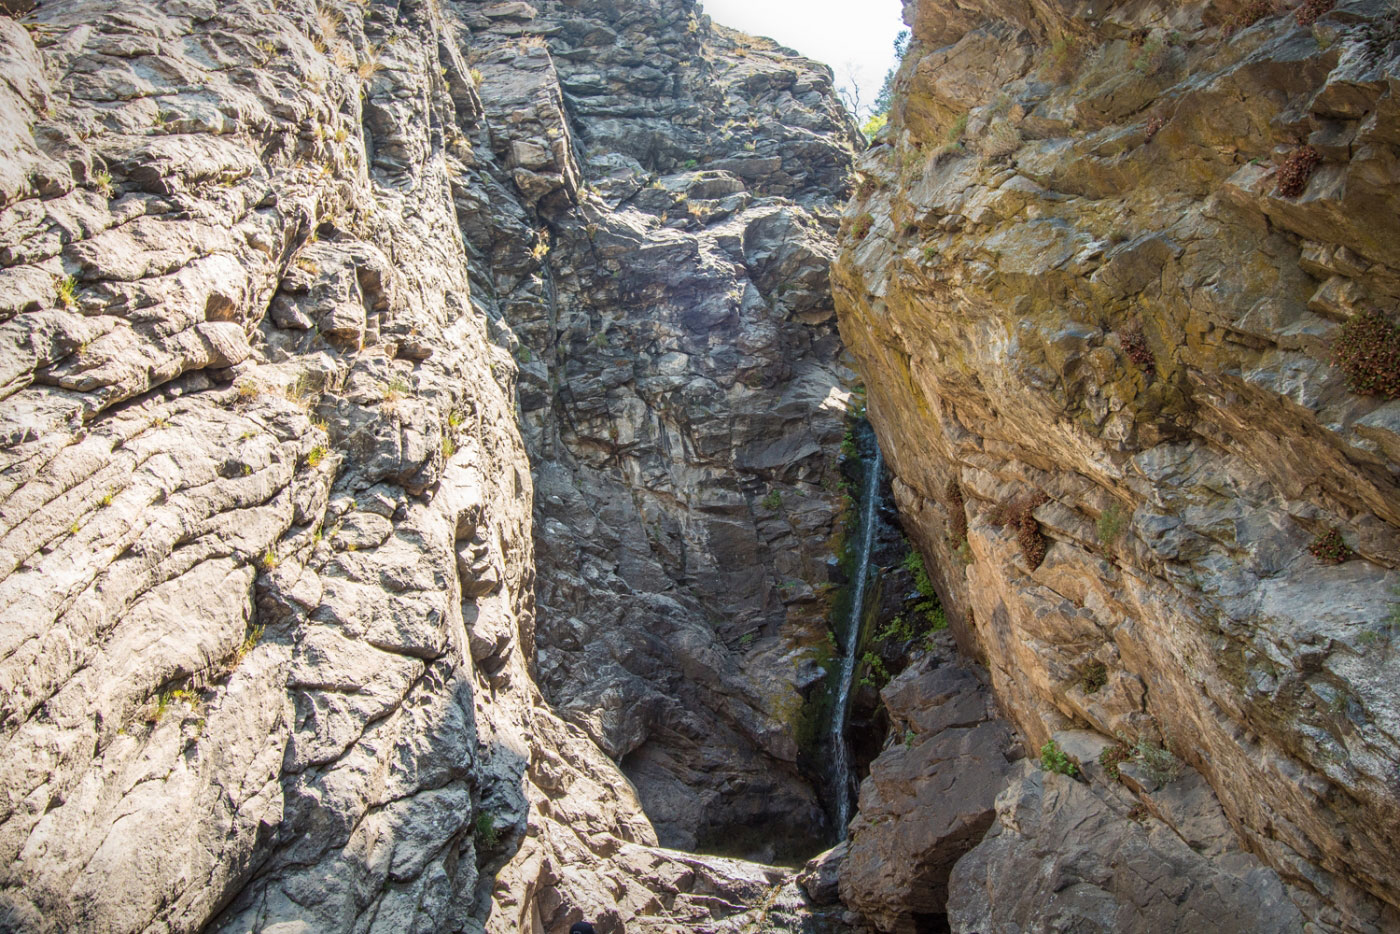 Canyoneer Rocky Mouth Falls in Wasatch-Cache National Forest, Utah - Stav is Lost